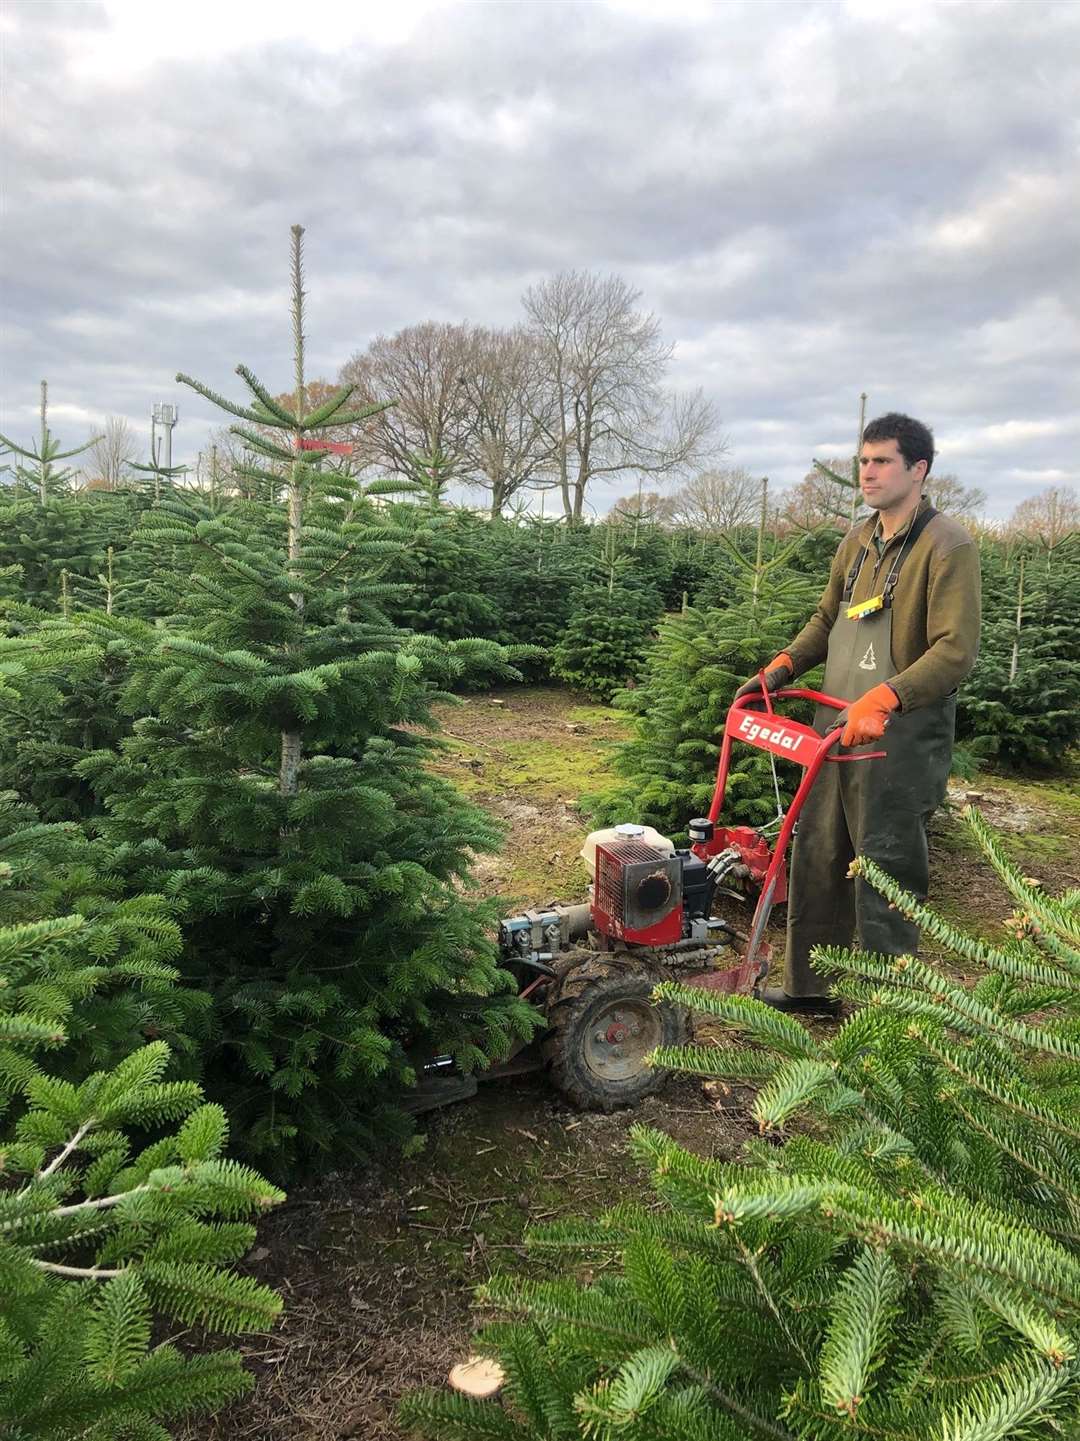 The Christmas tree harvest has started at Hole Park - a tree being cut with a tree shear, like a hydraulic secateur